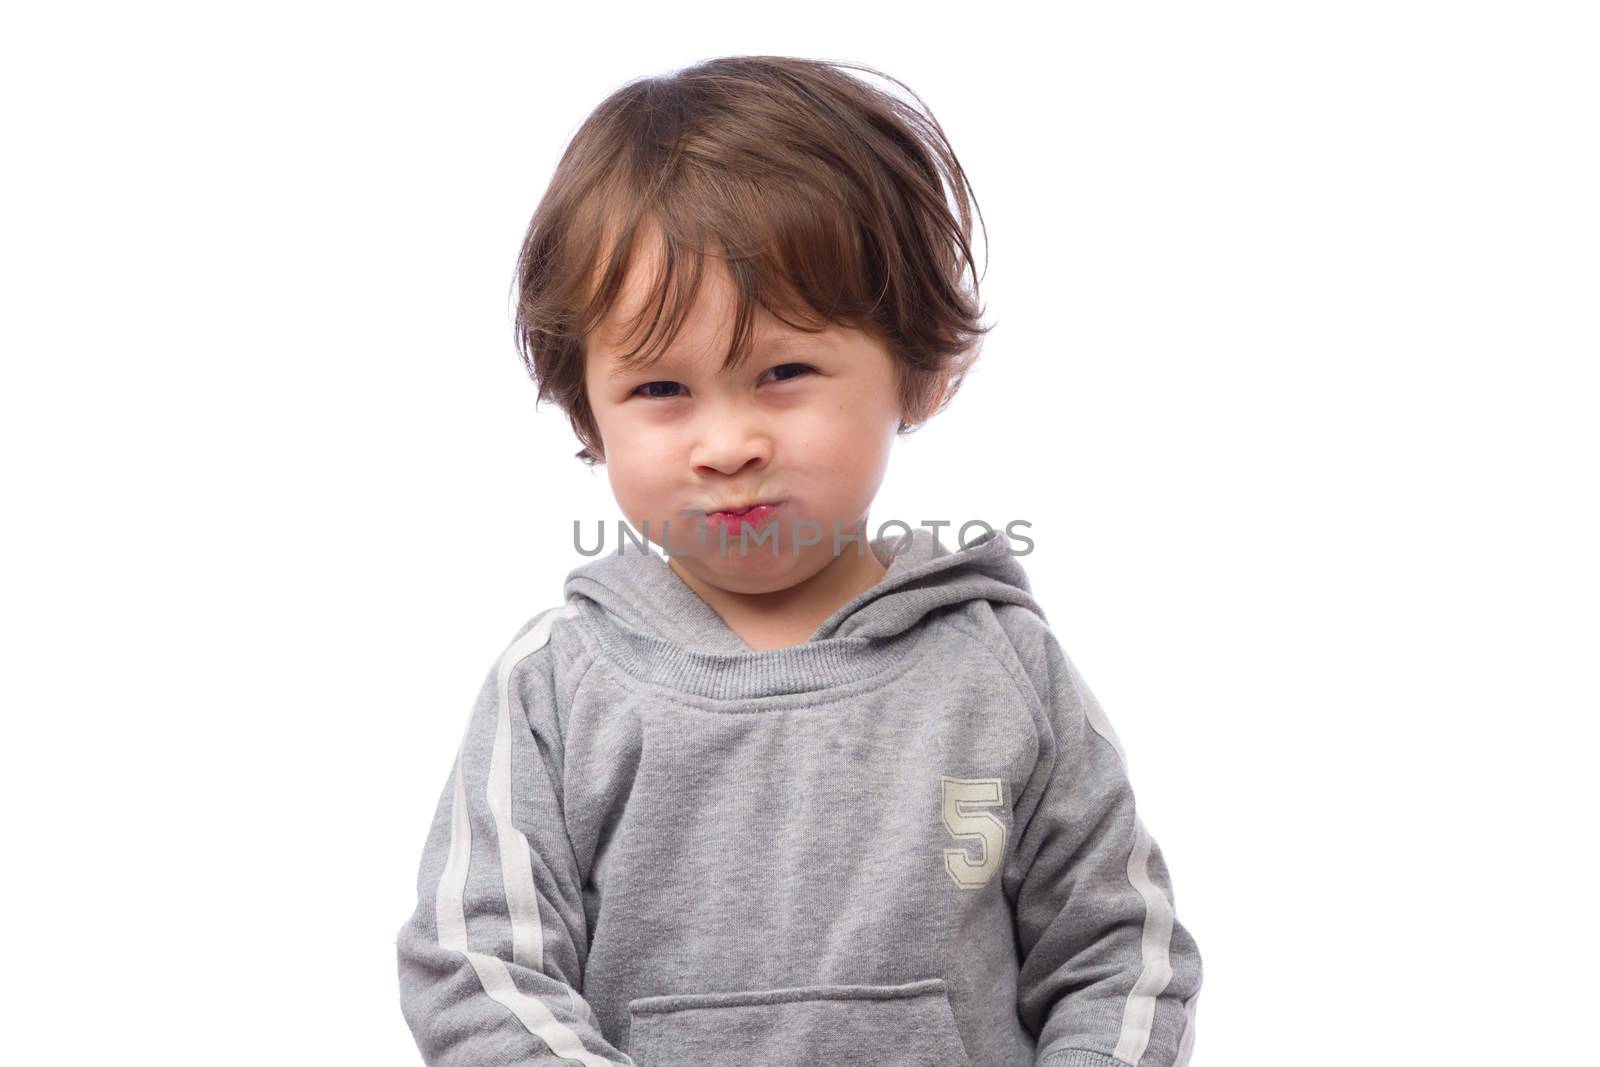 A cute 3 year old boy with an angry expression on a white background.